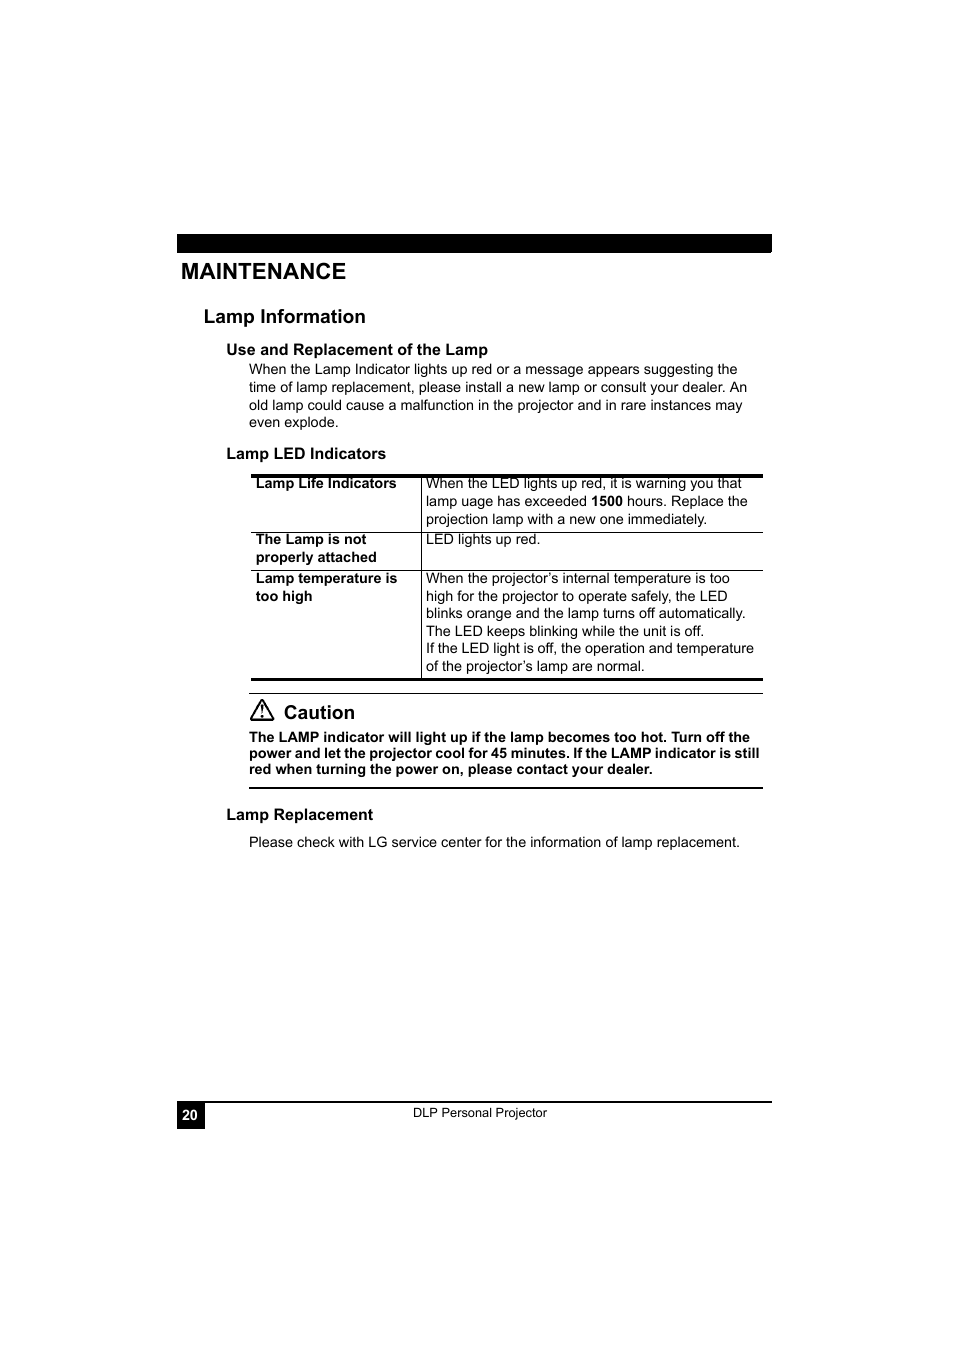 Maintenance, Lamp life indicators, The lamp is not properly attached | Lamp temperature is too high, Lamp information, Caution | LG RD-JT41 800X600 SVGA User Manual | Page 24 / 30